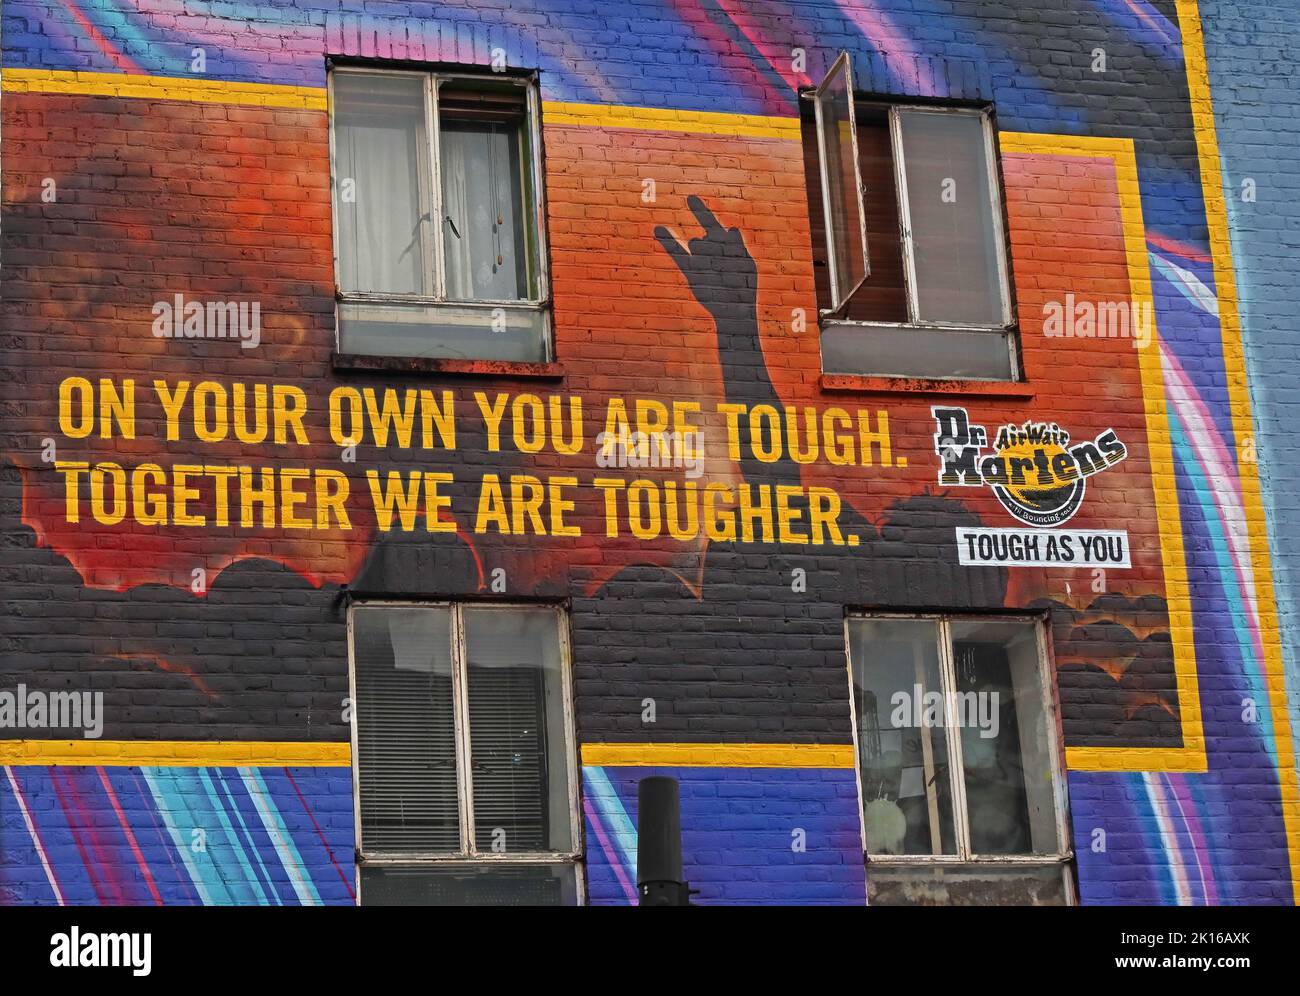 On your own you are tough - Together we are tougher. Dr Martens building mural art, on a shop in Camden High Street,Camden Town, London,England,UK,NW1 Stock Photo